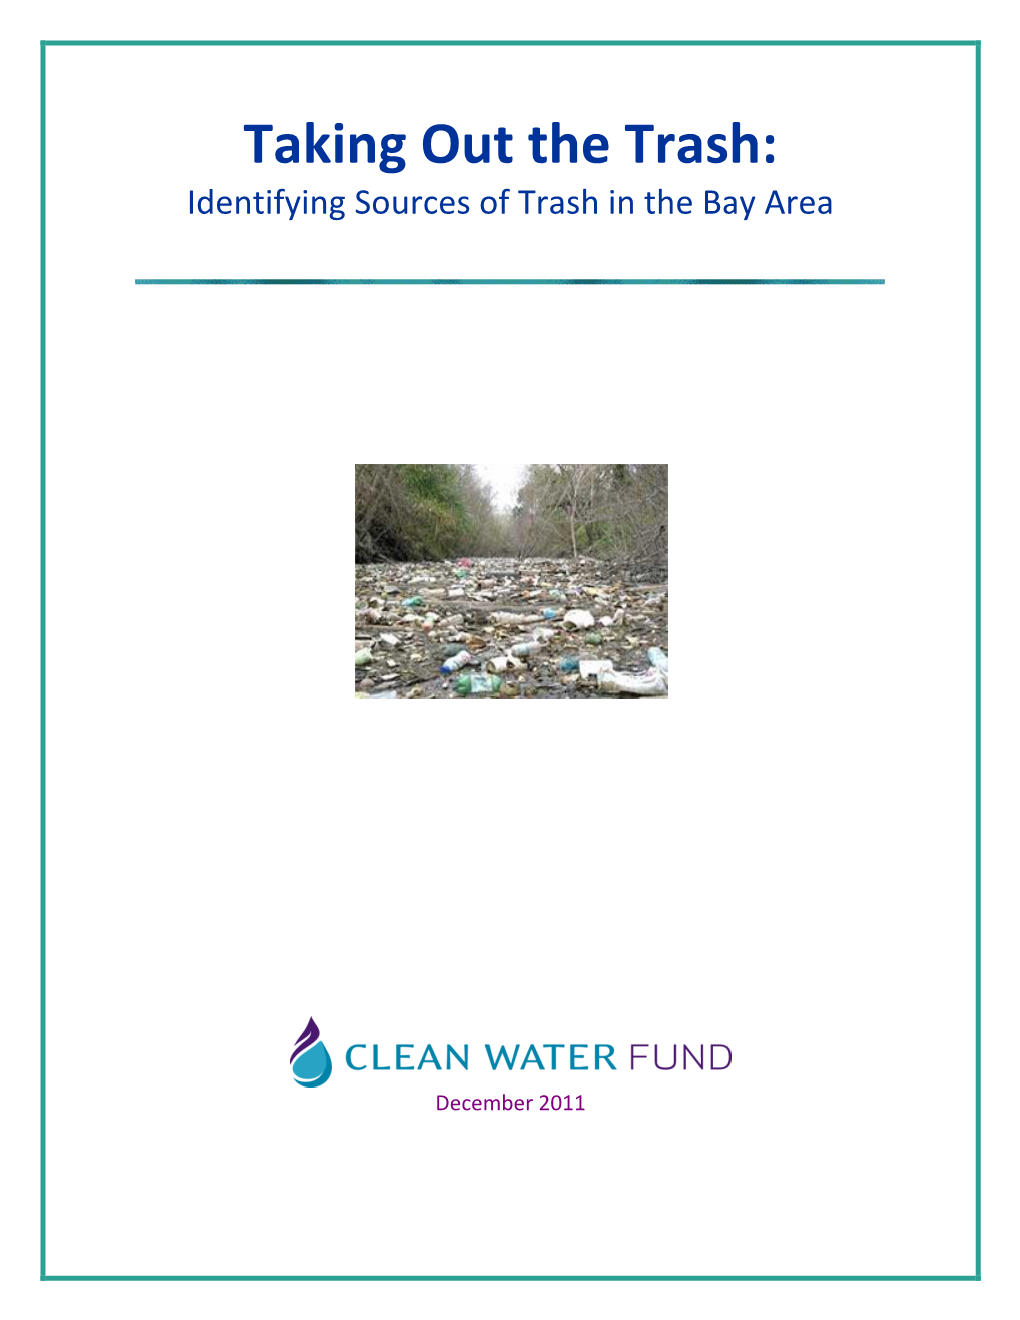 Taking out the Trash: Identifying Sources of Trash in the Bay Area